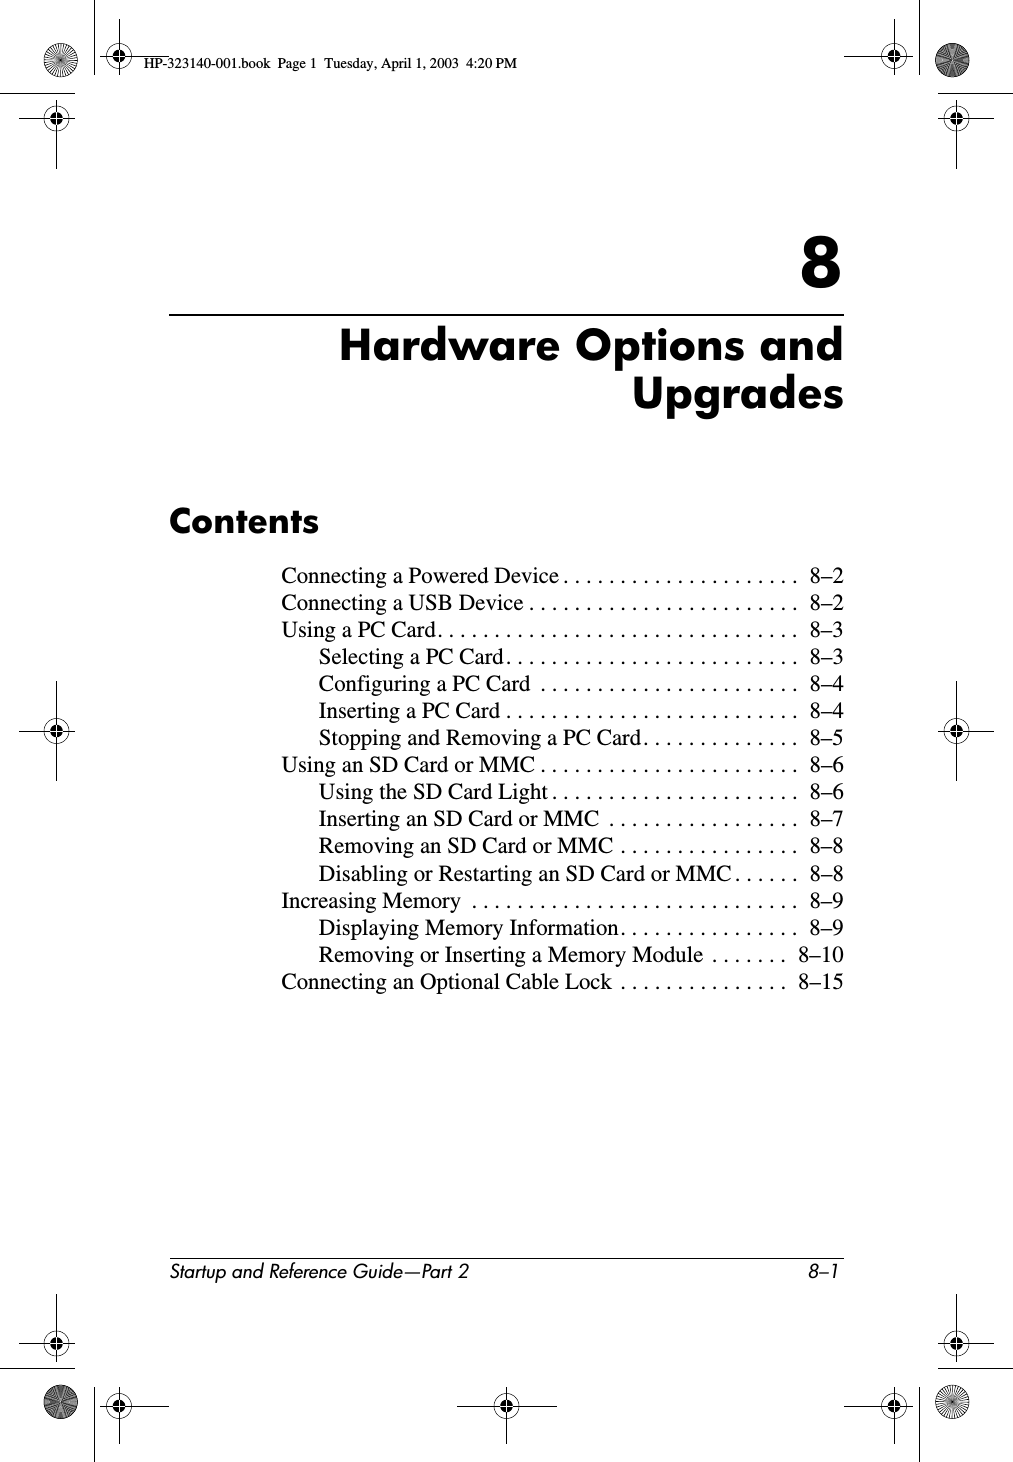 Startup and Reference Guide—Part 2 8–18Hardware Options andUpgradesContentsConnecting a Powered Device . . . . . . . . . . . . . . . . . . . . .  8–2Connecting a USB Device . . . . . . . . . . . . . . . . . . . . . . . .  8–2Using a PC Card. . . . . . . . . . . . . . . . . . . . . . . . . . . . . . . .  8–3Selecting a PC Card. . . . . . . . . . . . . . . . . . . . . . . . . .  8–3Configuring a PC Card  . . . . . . . . . . . . . . . . . . . . . . .  8–4Inserting a PC Card . . . . . . . . . . . . . . . . . . . . . . . . . .  8–4Stopping and Removing a PC Card. . . . . . . . . . . . . .  8–5Using an SD Card or MMC . . . . . . . . . . . . . . . . . . . . . . .  8–6Using the SD Card Light . . . . . . . . . . . . . . . . . . . . . .  8–6Inserting an SD Card or MMC  . . . . . . . . . . . . . . . . .  8–7Removing an SD Card or MMC . . . . . . . . . . . . . . . .  8–8Disabling or Restarting an SD Card or MMC . . . . . .  8–8Increasing Memory  . . . . . . . . . . . . . . . . . . . . . . . . . . . . .  8–9Displaying Memory Information. . . . . . . . . . . . . . . .  8–9Removing or Inserting a Memory Module  . . . . . . .  8–10Connecting an Optional Cable Lock  . . . . . . . . . . . . . . .  8–15HP-323140-001.book  Page 1  Tuesday, April 1, 2003  4:20 PM